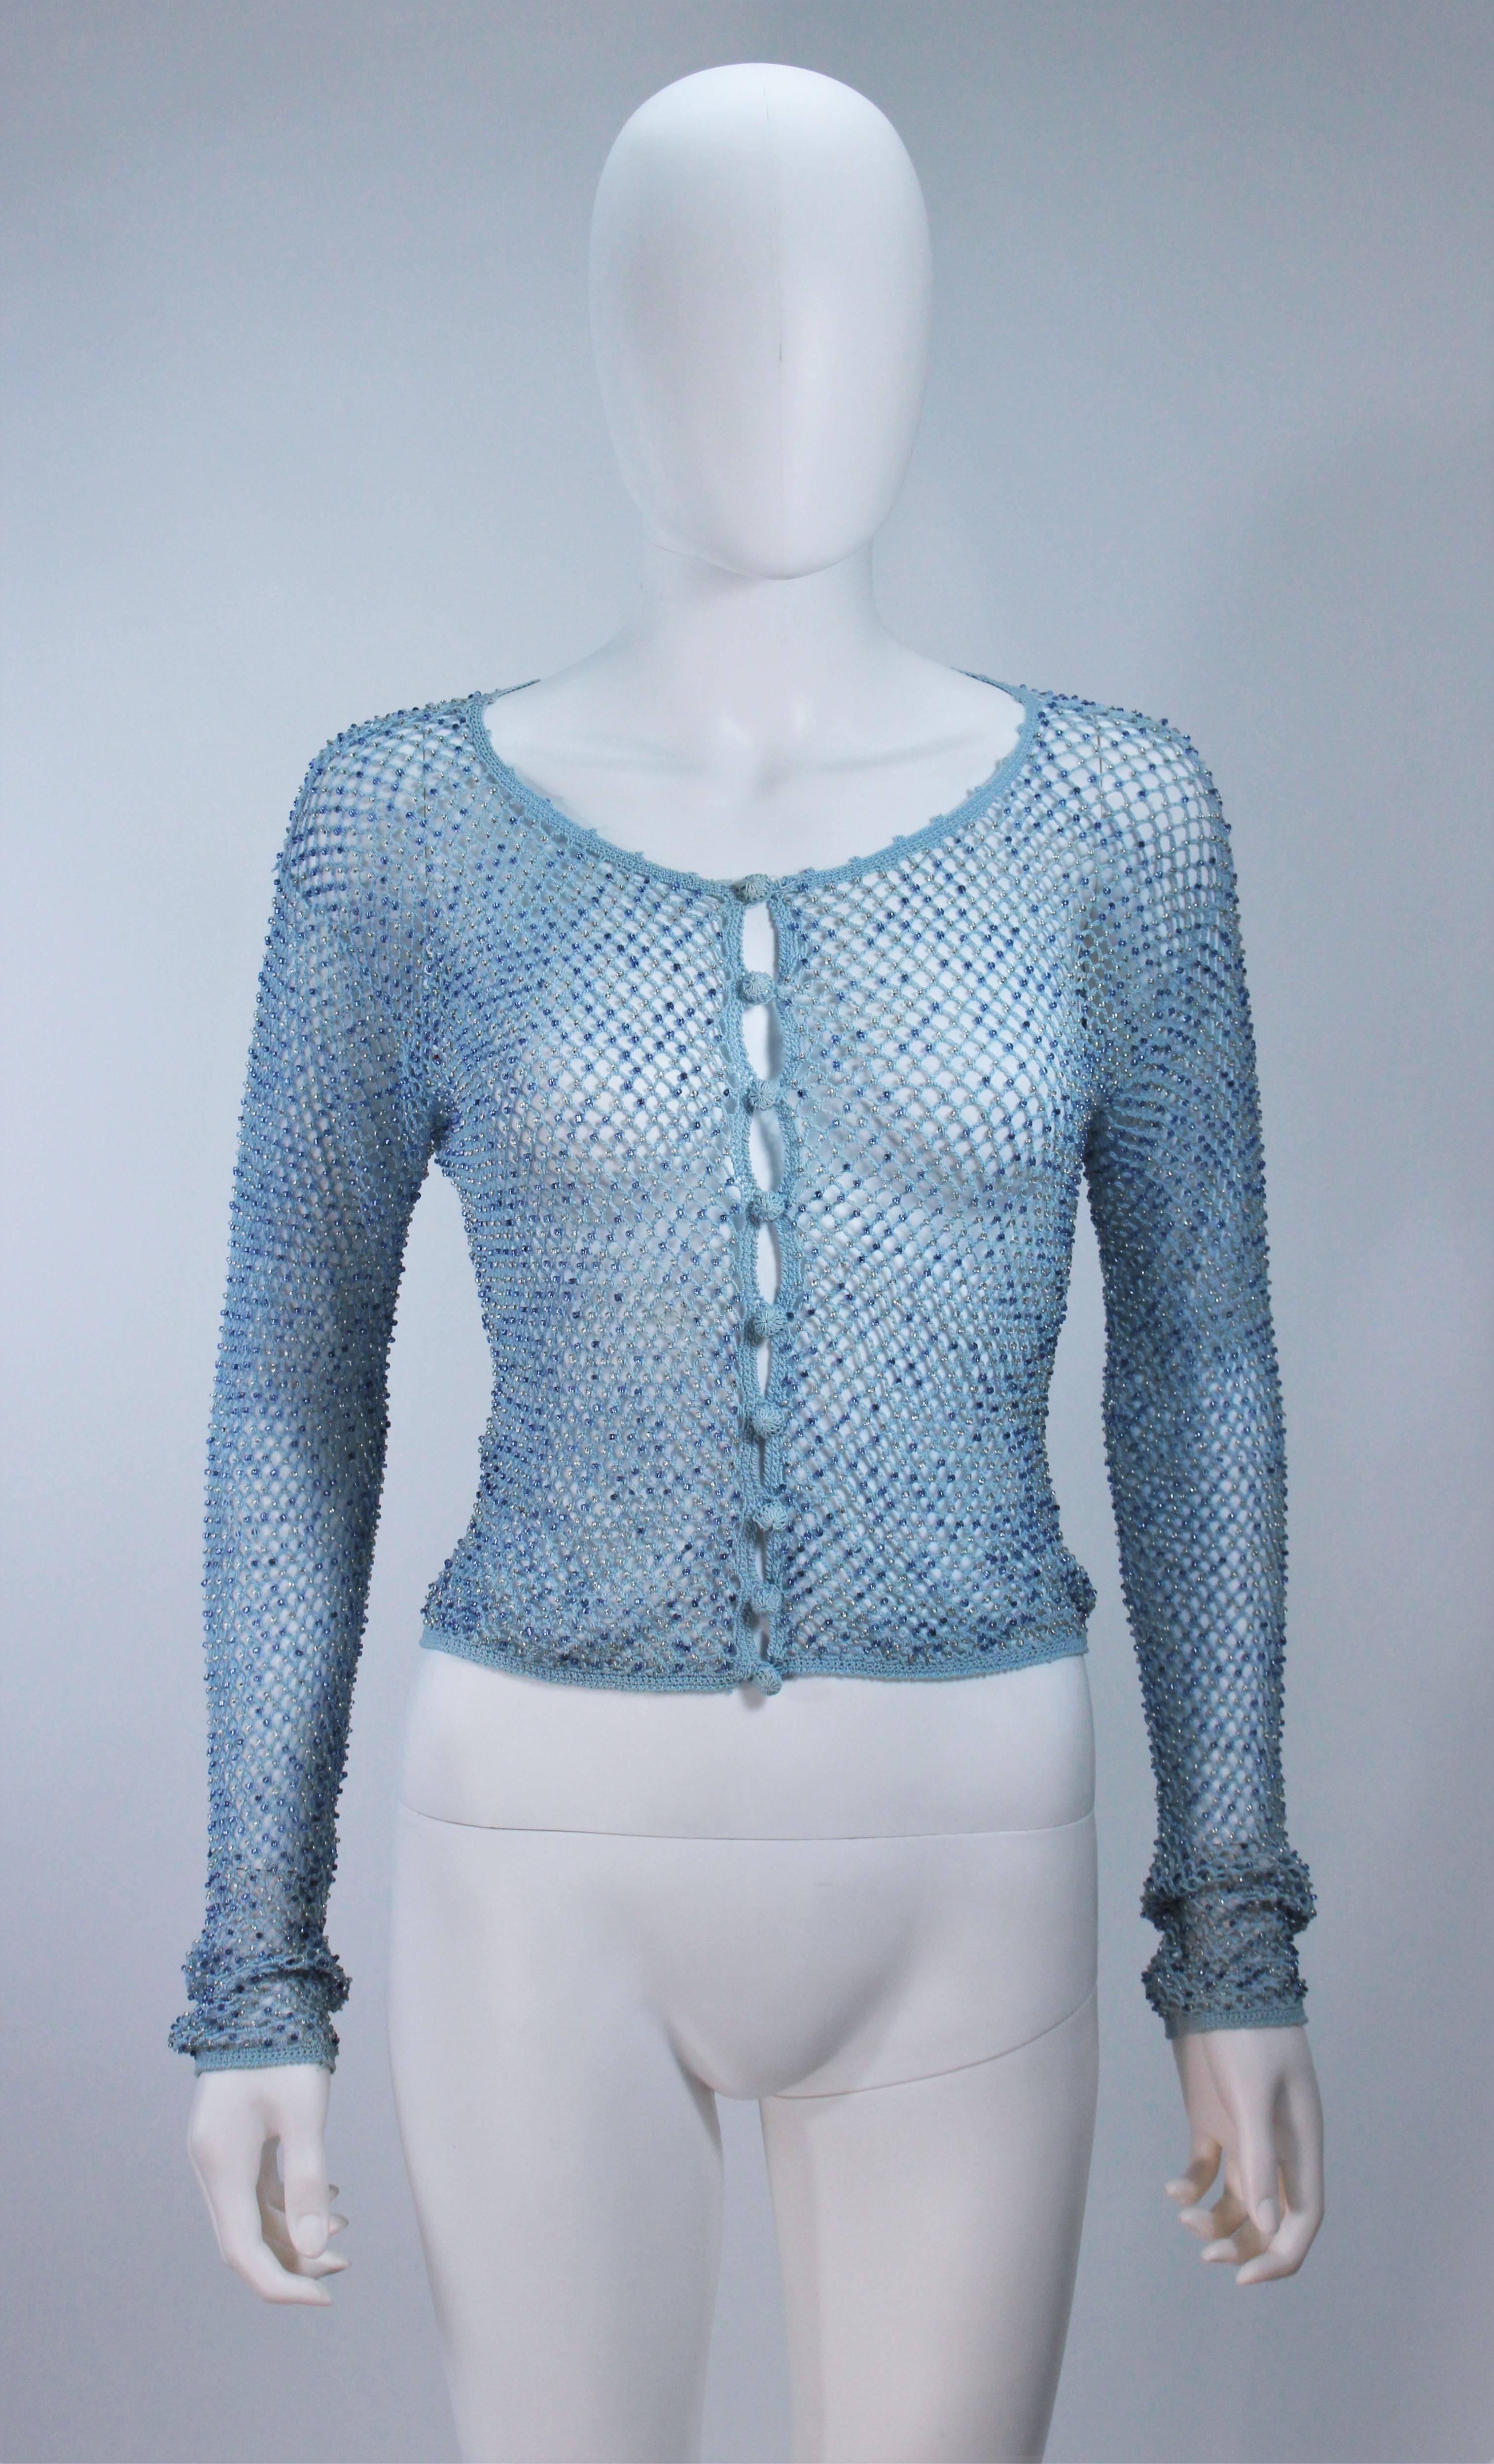  This Moschino  sweater is composed of a sky blue knit and features beaded applique. There are center front button closures. In great condition, with original tags. 

  **Please cross-reference measurements for personal accuracy. Size in